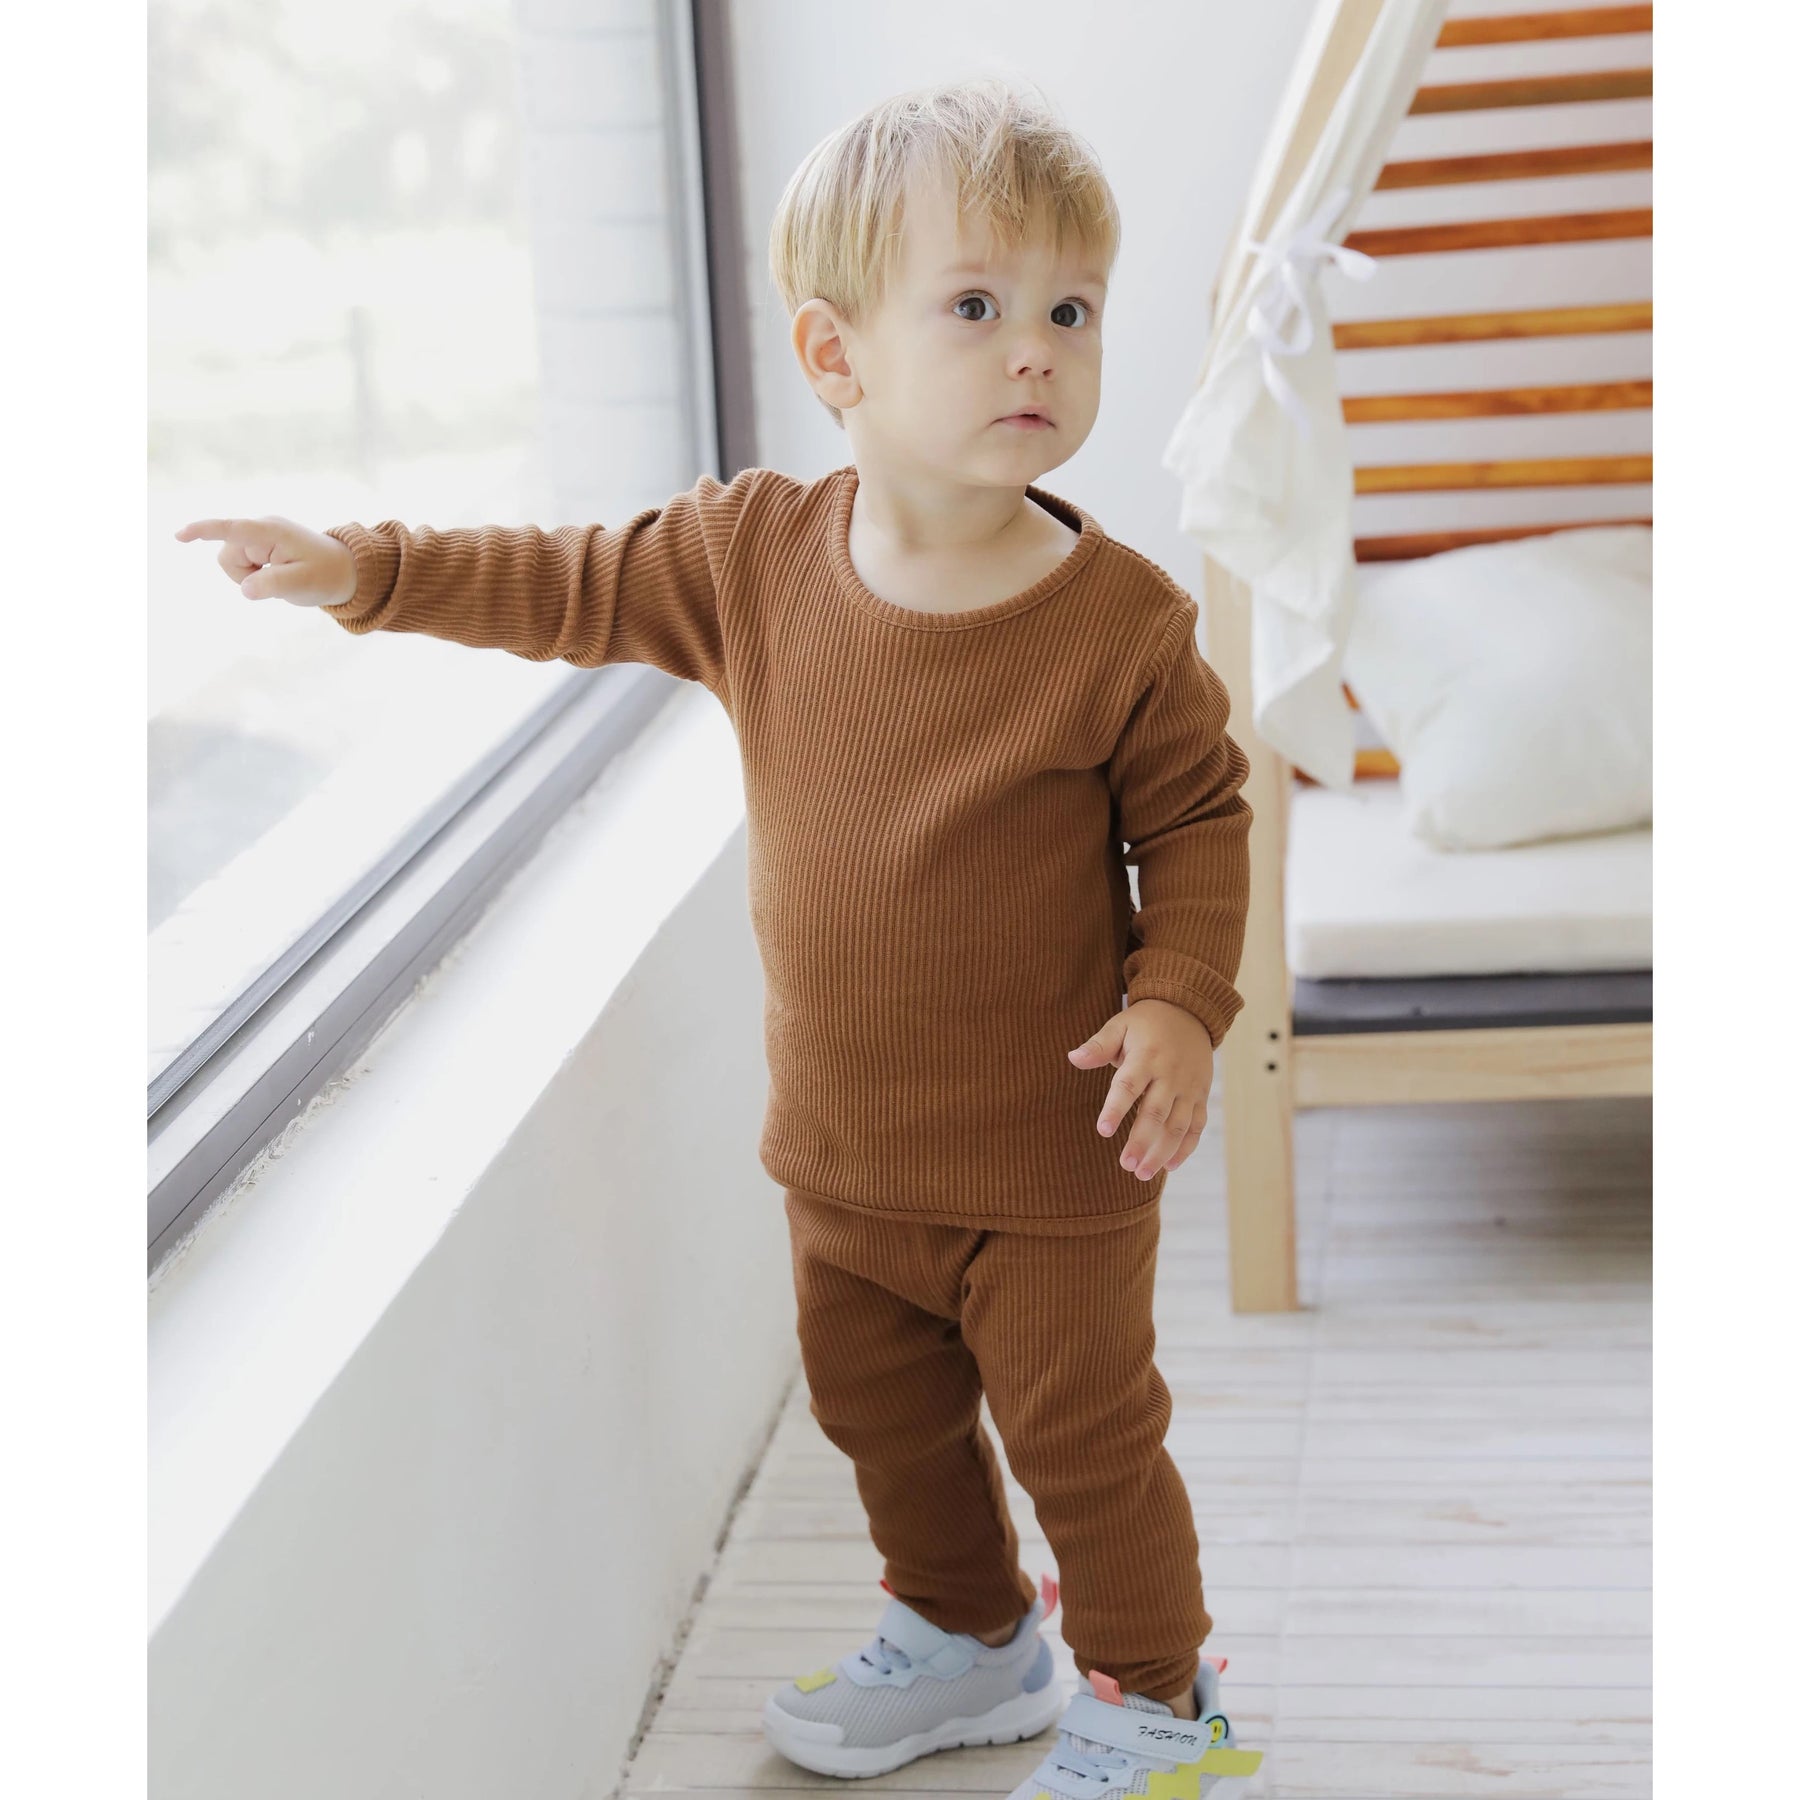 GREAY LOUNGEWEAR - Maxims Baby Store